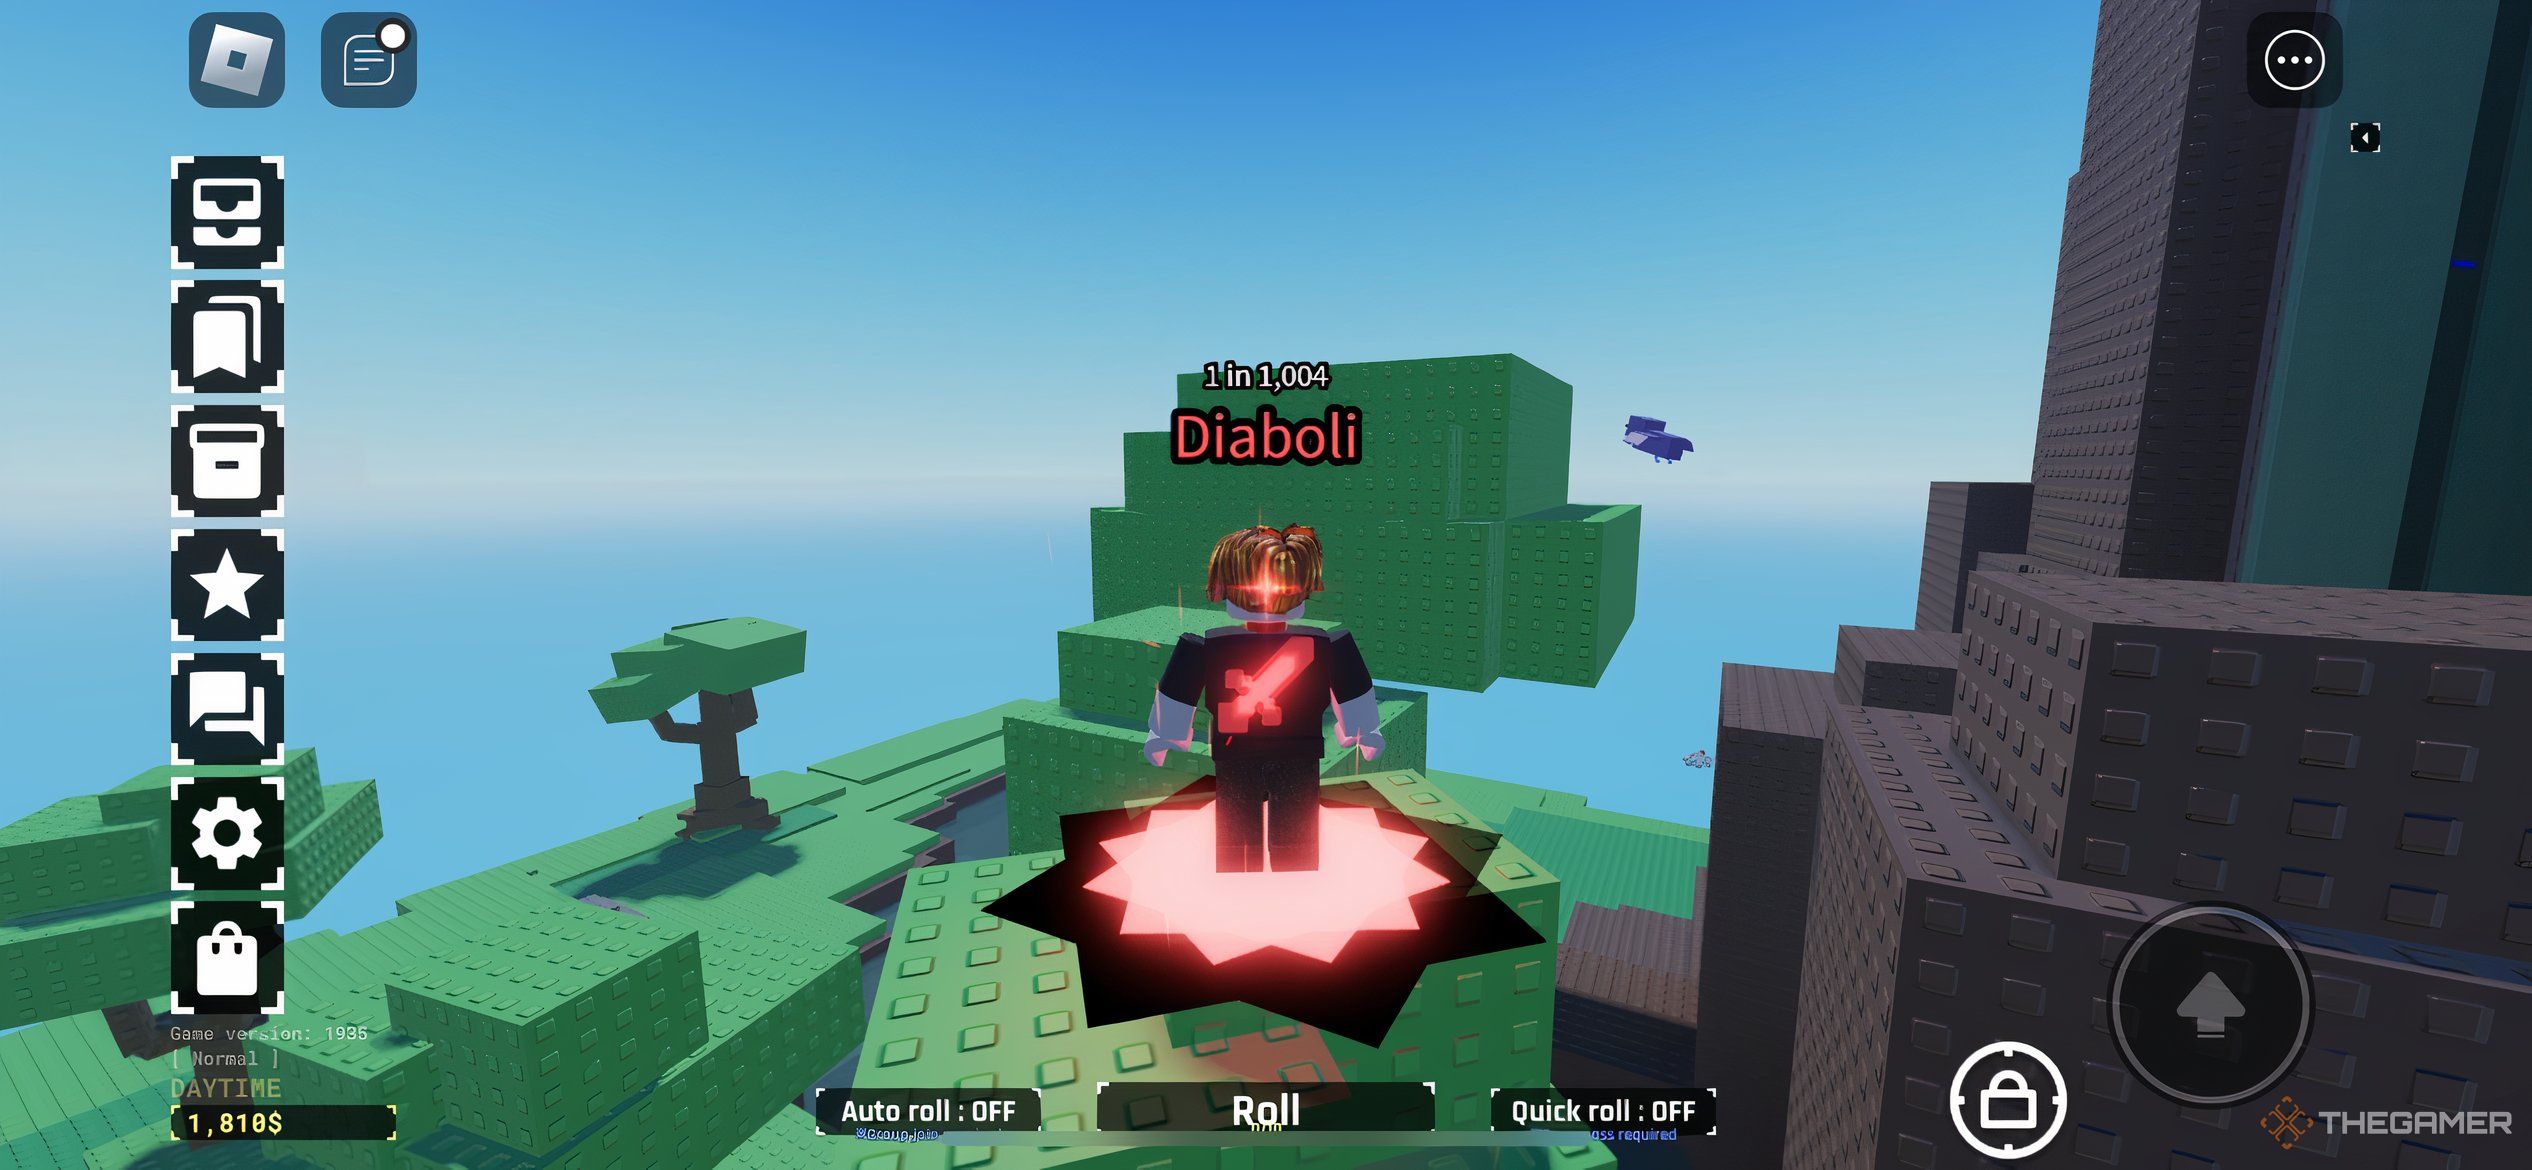 Jump across the group of blocks to reach the face of the waterfall in Sol's RNG.